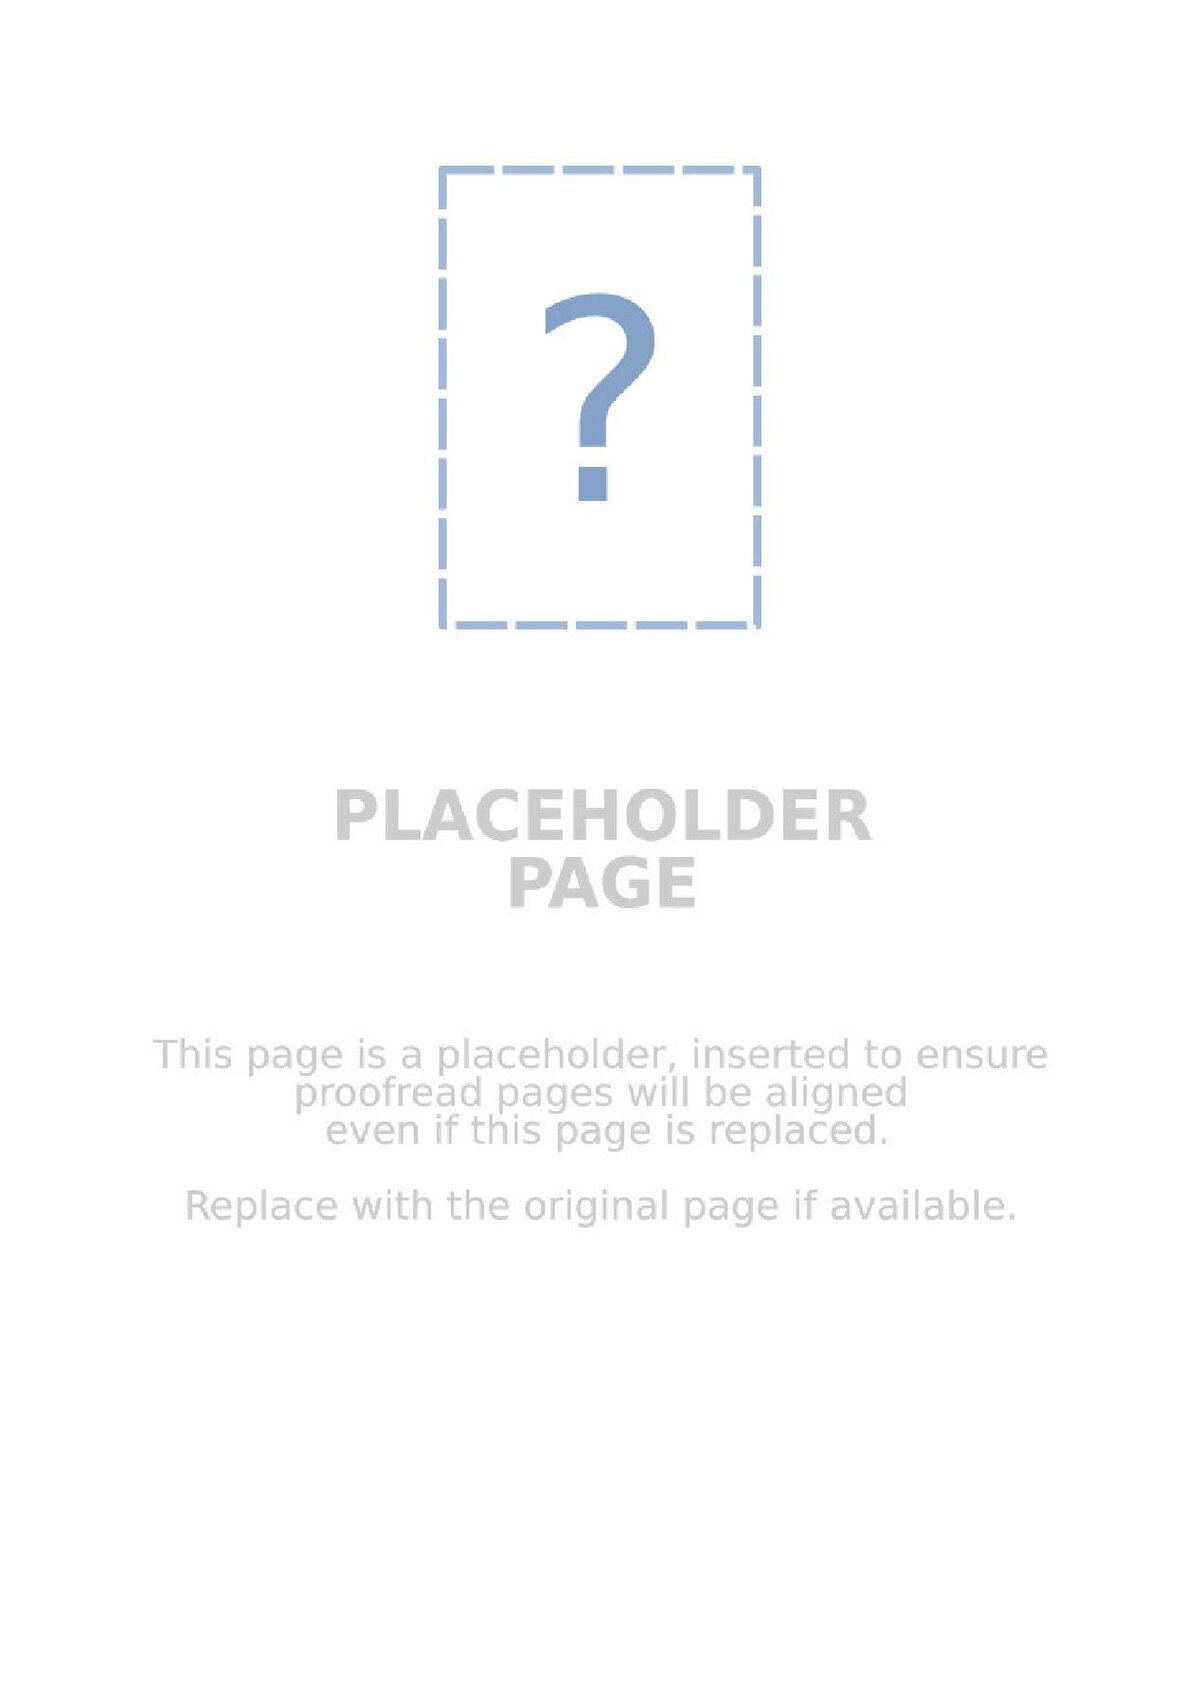 File:Generic placeholder page.pdf - Wikimedia Commons